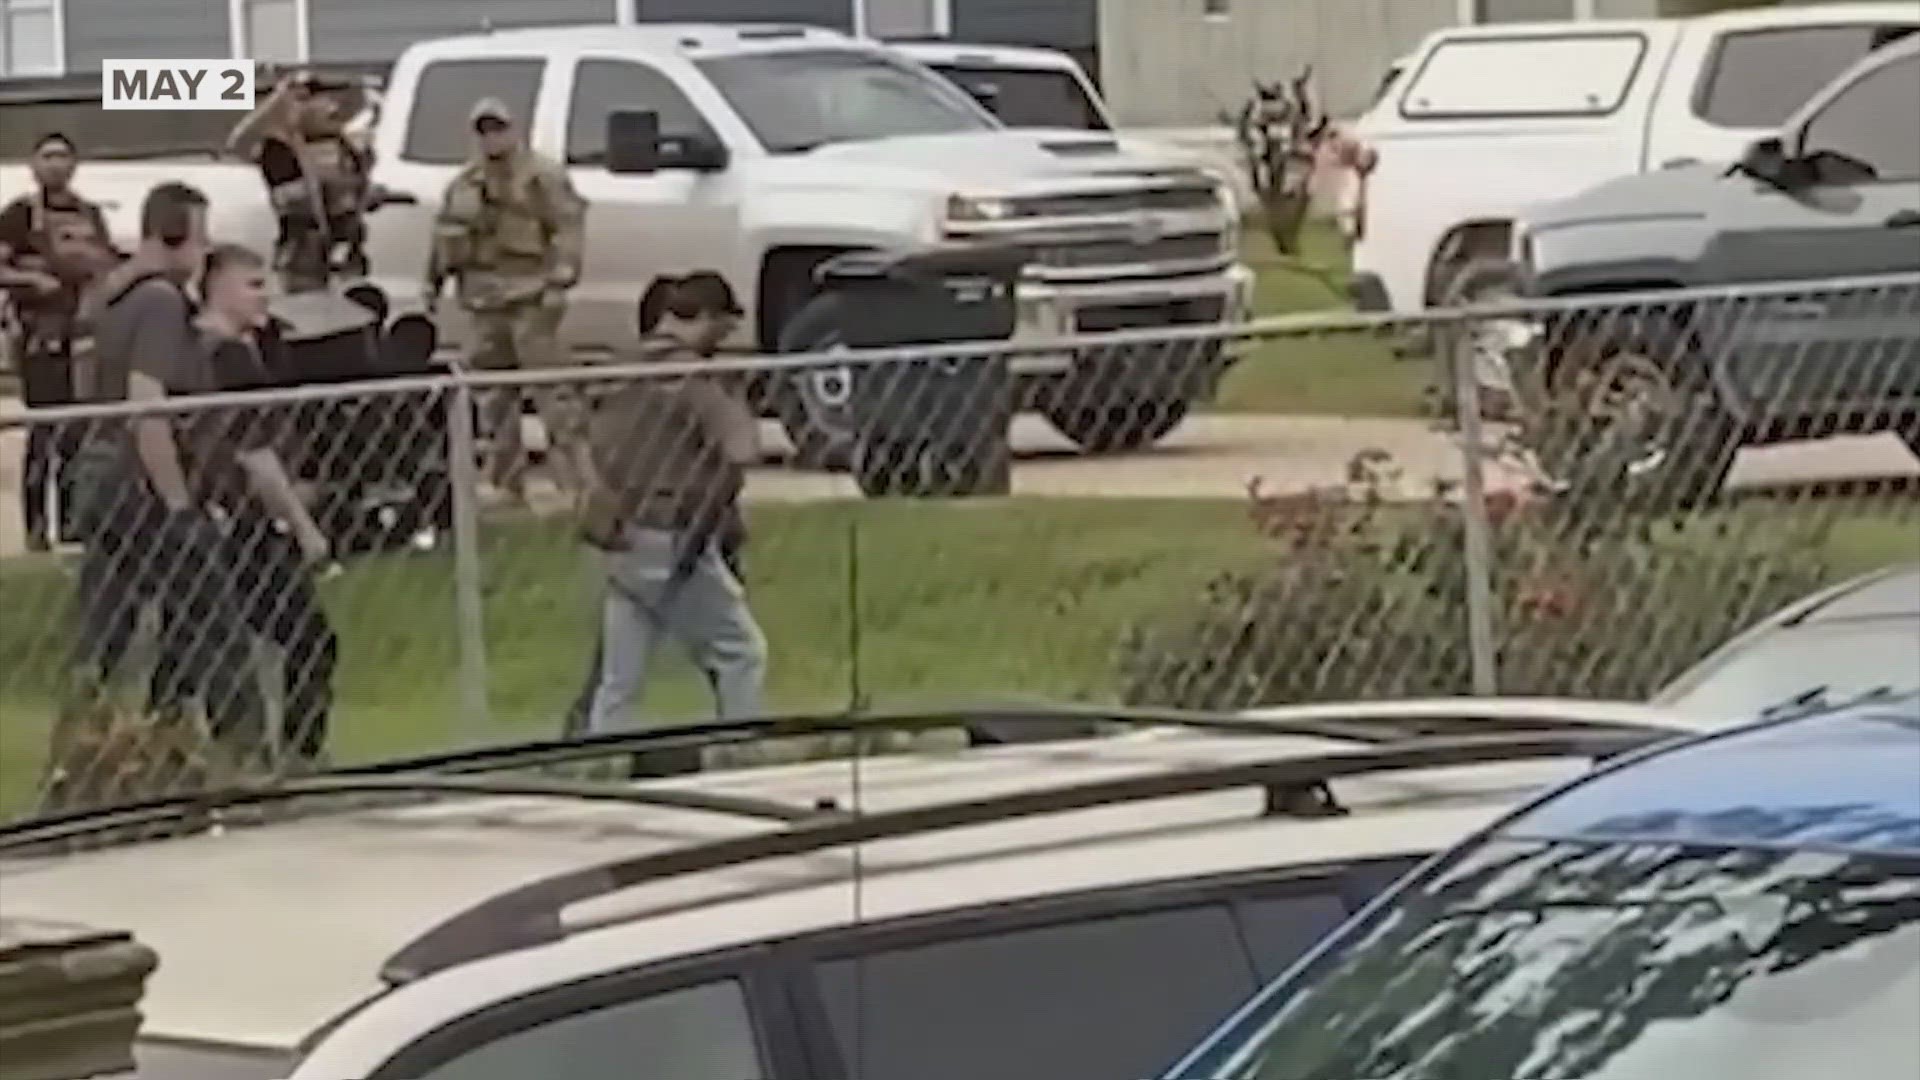 An Associated Press investigation also disclosed that deputies took nearly four times as long to arrive at the April 28 mass shooting than Sheriff Capers claimed.